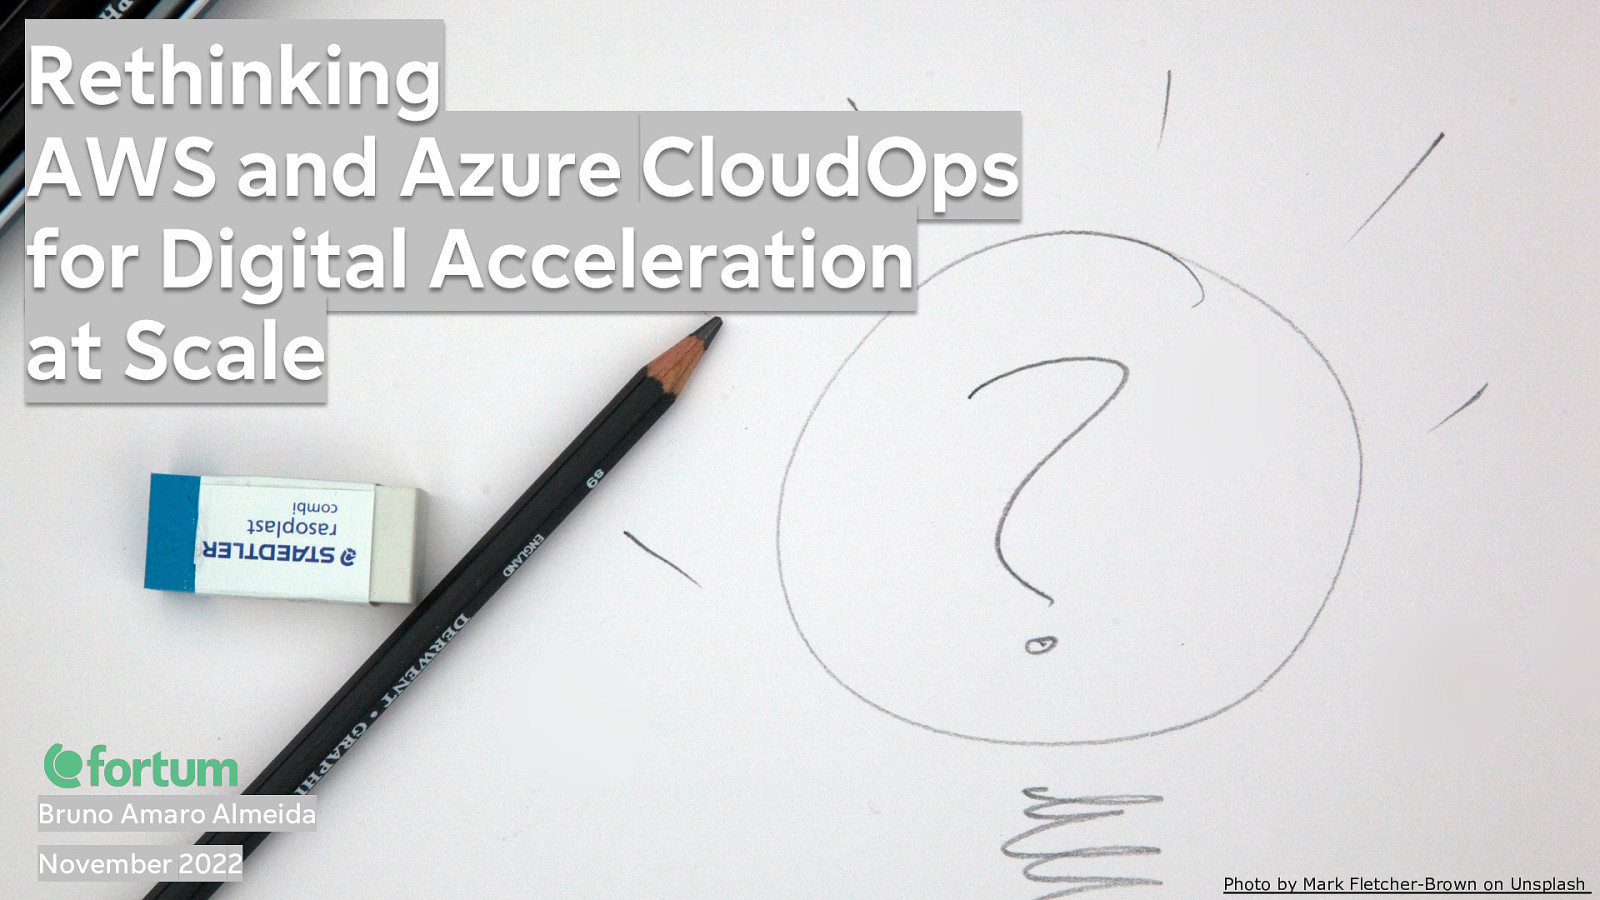 Rethinking AWS and Azure CloudOps for Digital Acceleration at Scale